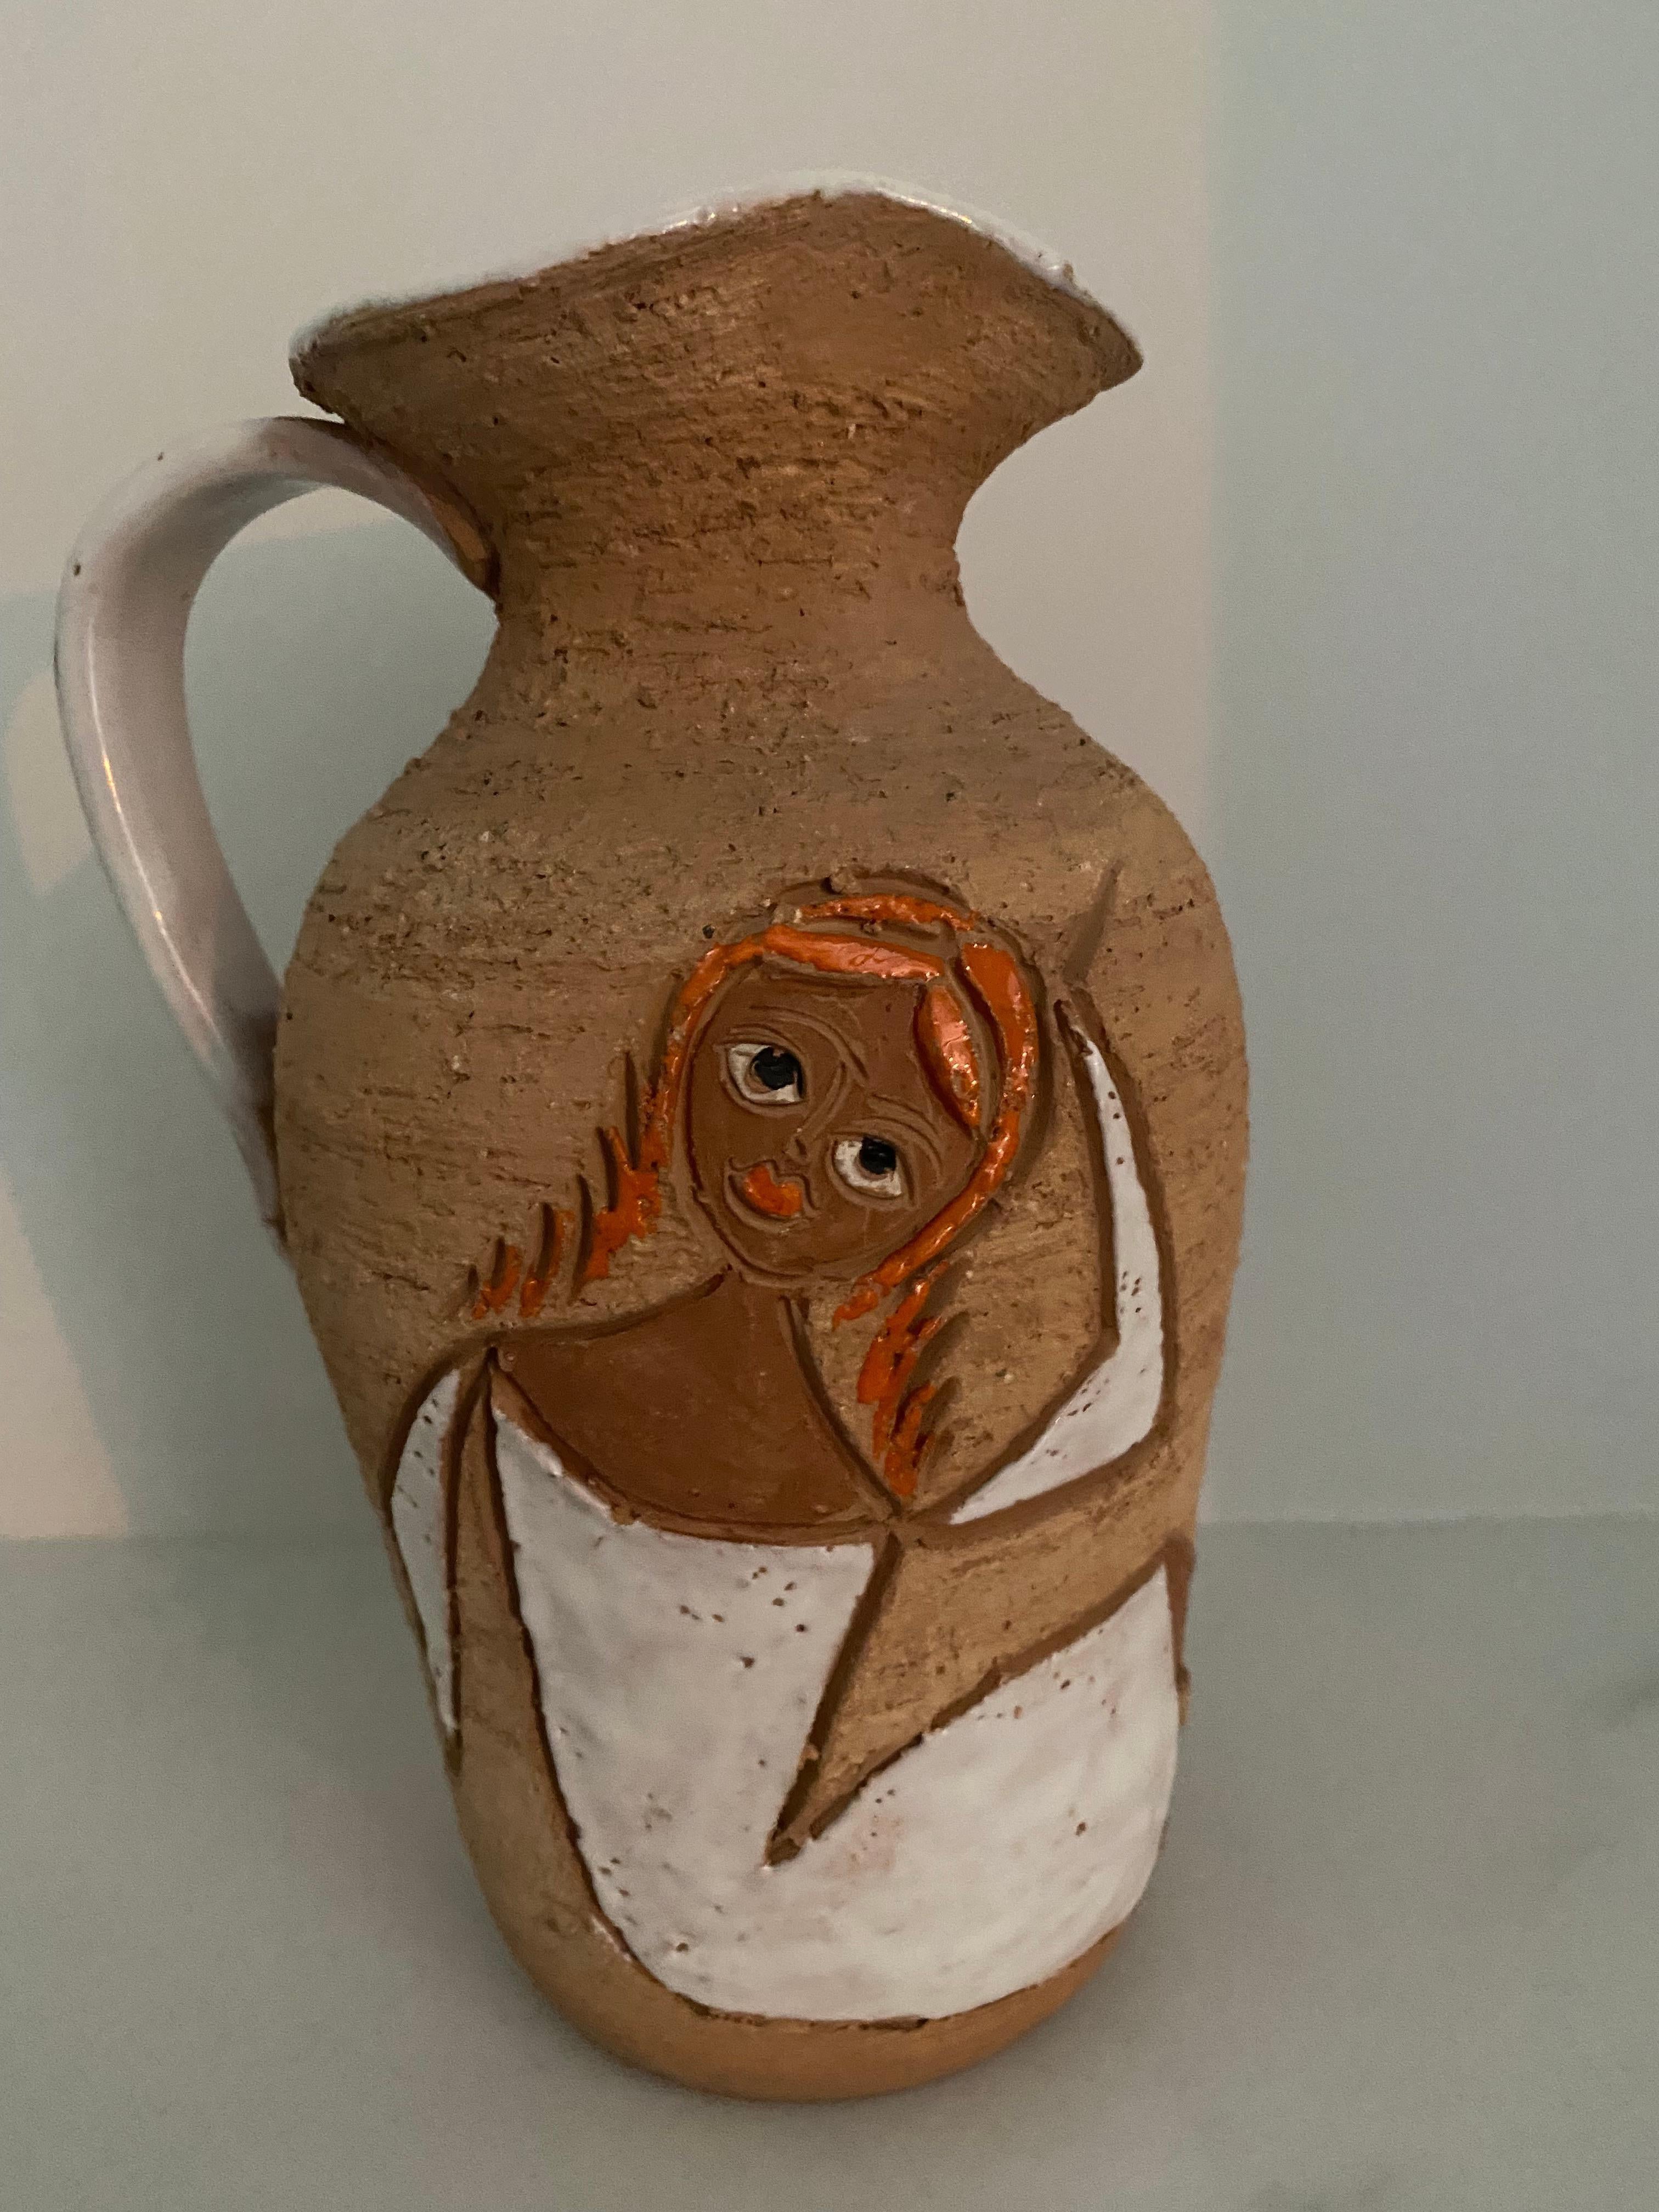 Stunning and vibrant, 19 cm high, jug vase with sgrafitto and hand-painted colored glossy pattern of stylised women. On the base is painted Italy 7872.
I have also a larger one for sale.
Fratelli Fanciullacci Pottery: during the first half of the